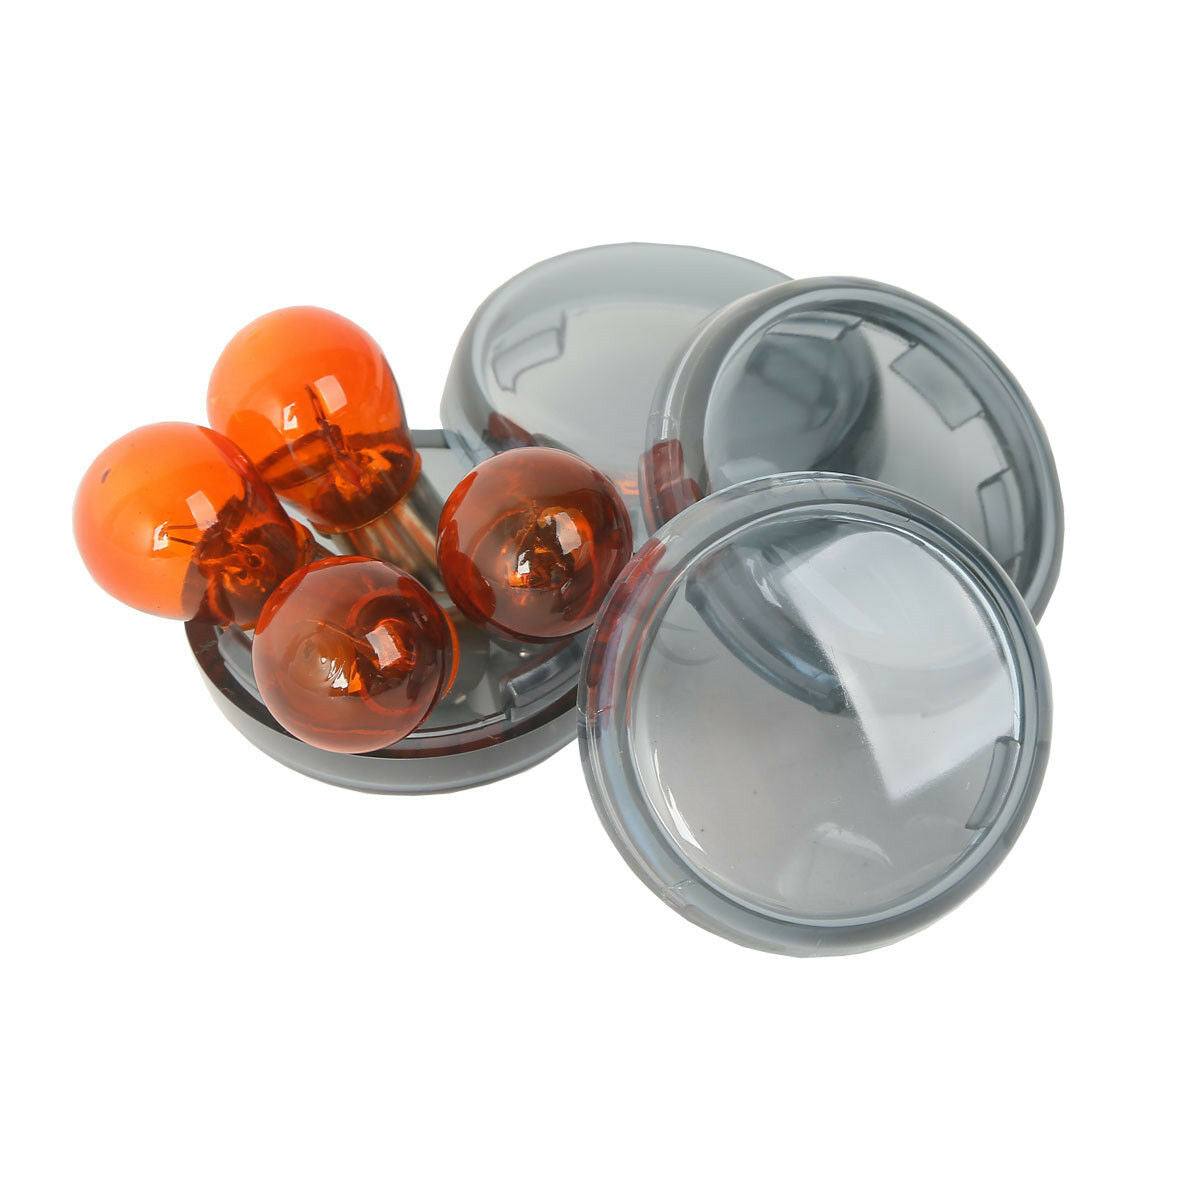 Smoked Turn Signal Lenses Amber Bulbs For Harley Davidson Softail Dyna 2000-UP - Moto Life Products